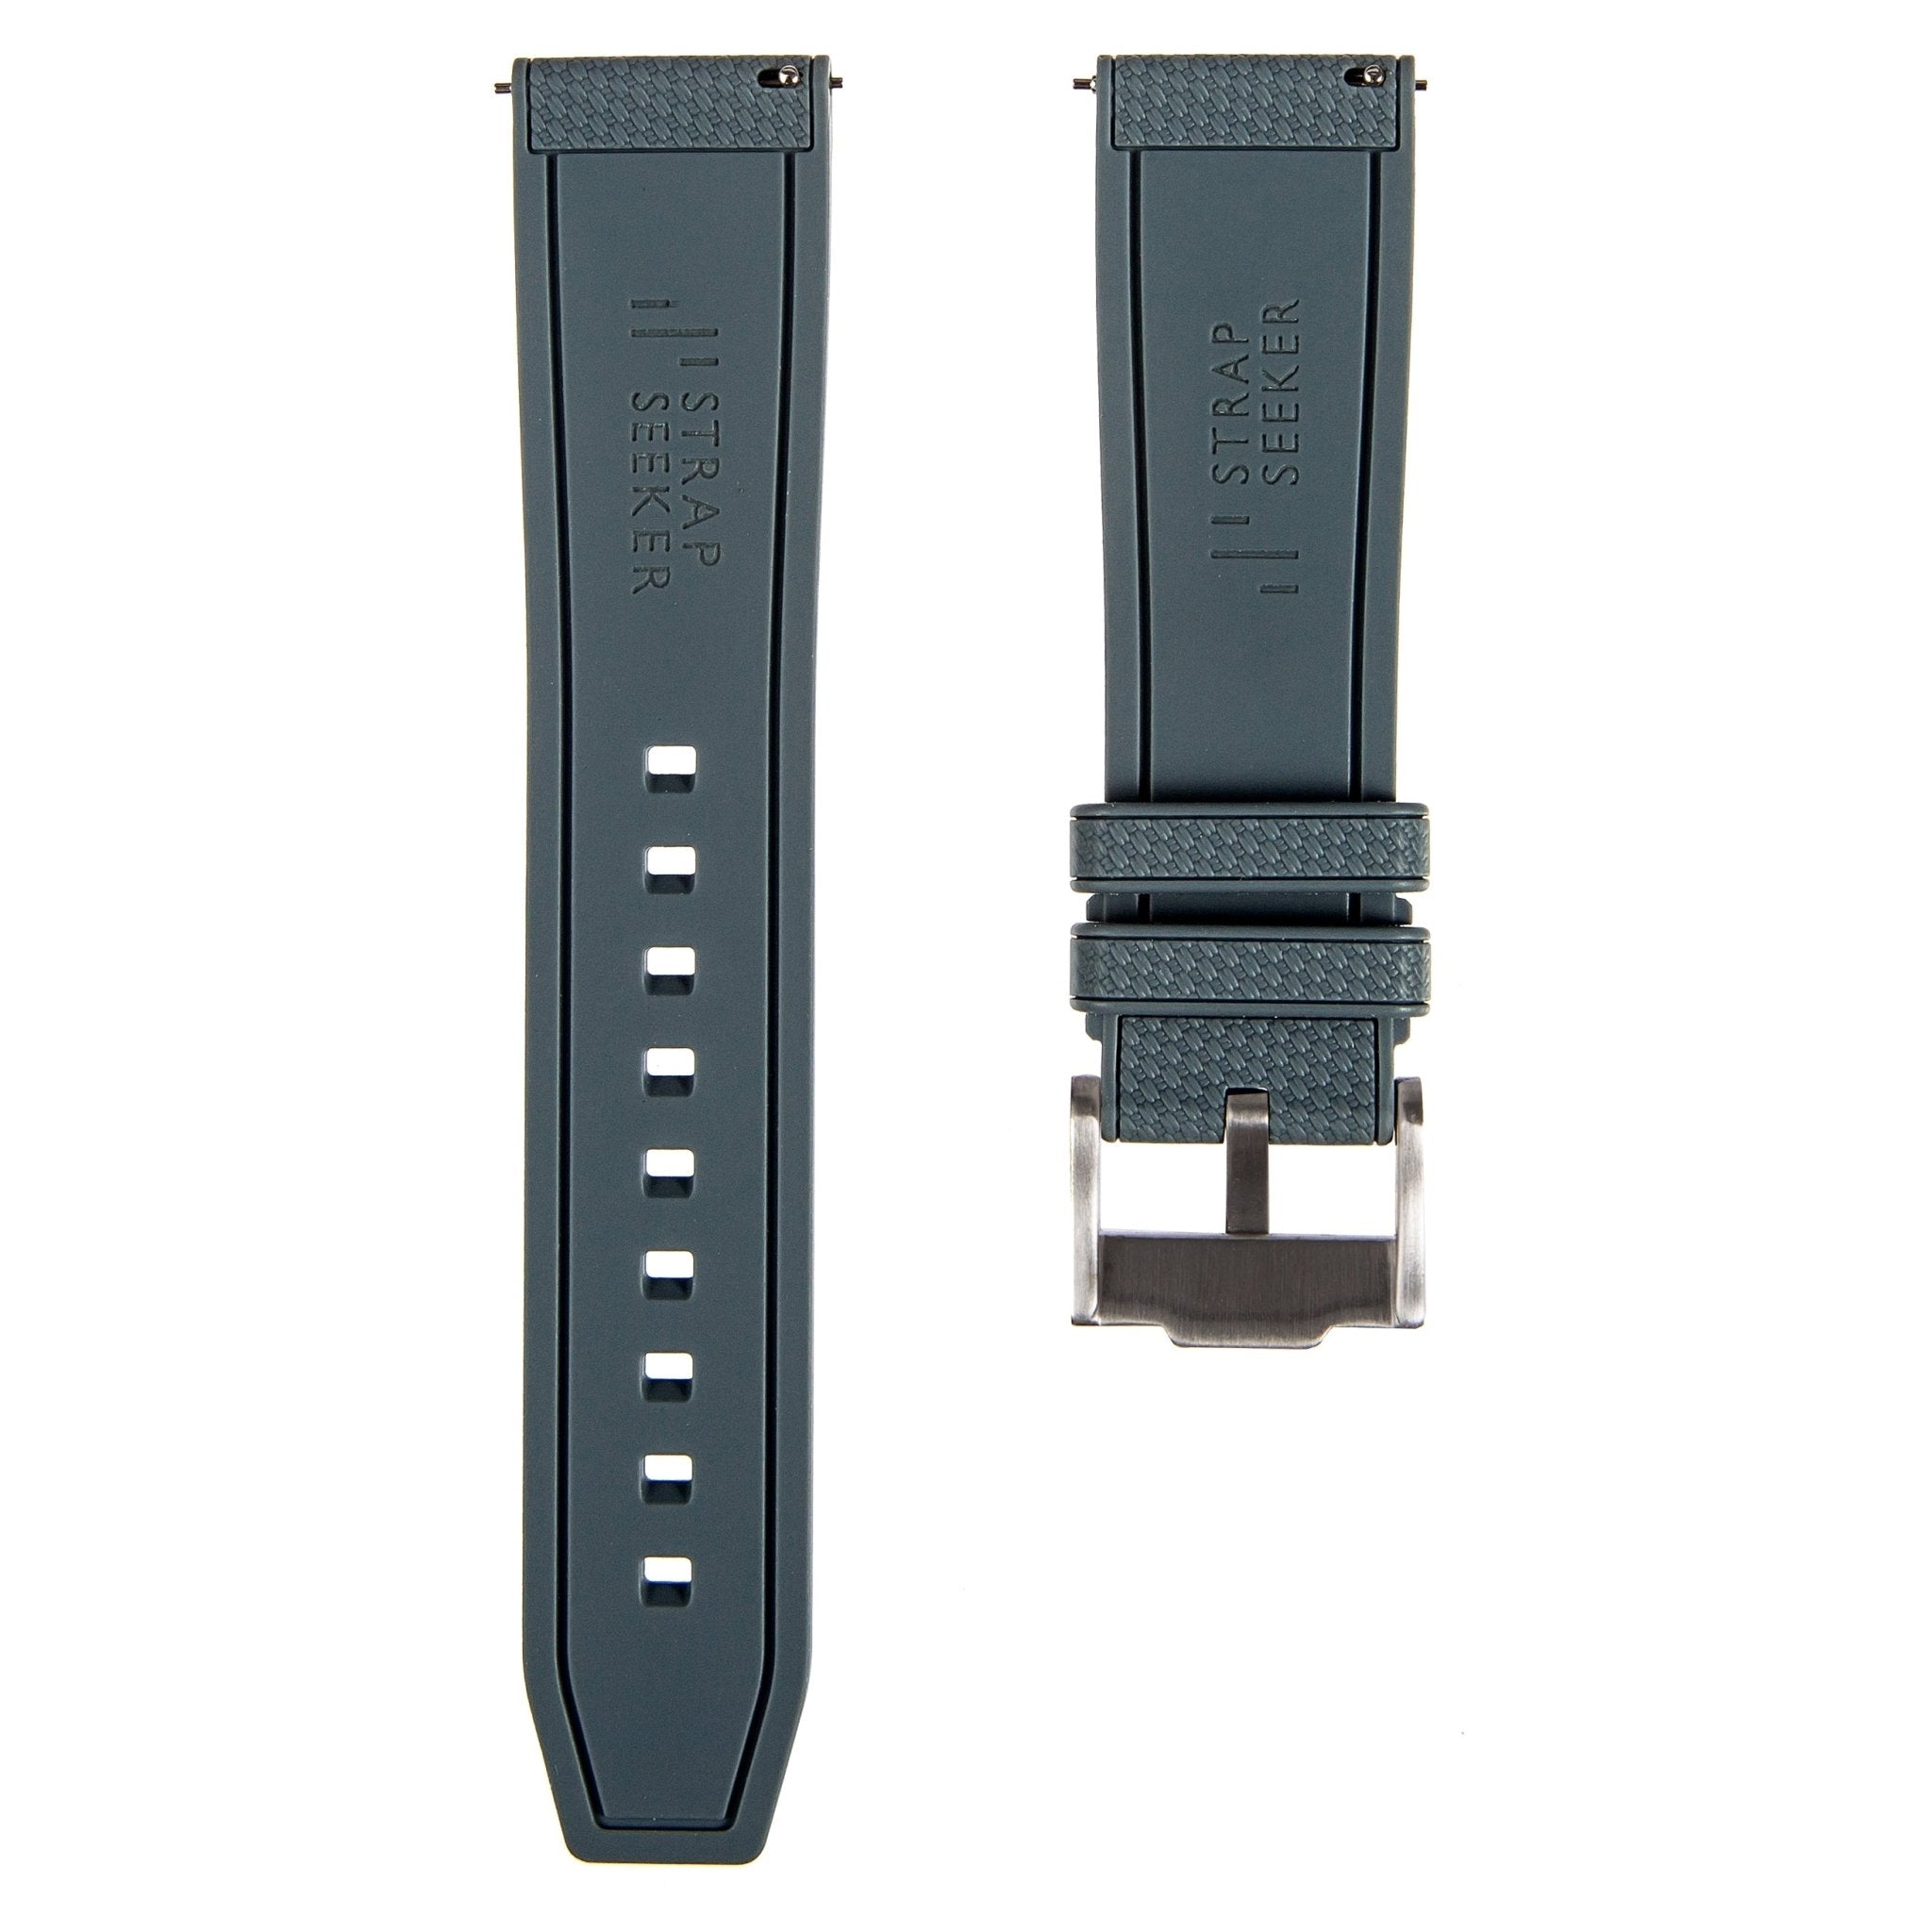 Flexweave Premium SIlicone Rubber Strap - Quick-Release - Compatible with Omega Moonwatch – Grey (2423) -Strapseeker